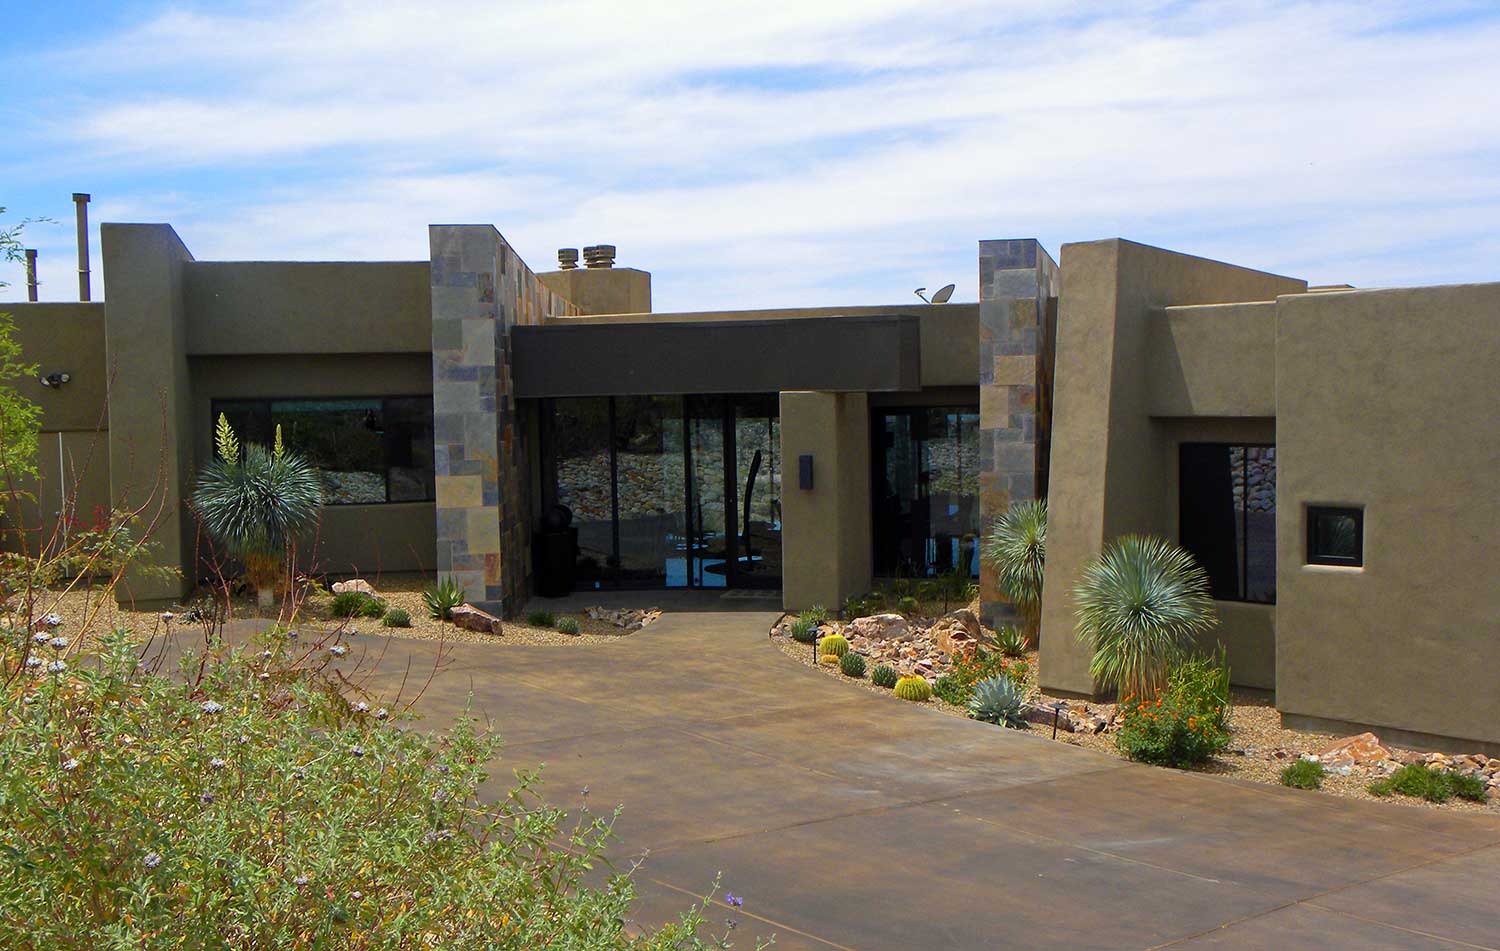 The driveway of a La Reserve luxury house with a wide living area with glass walls and windows